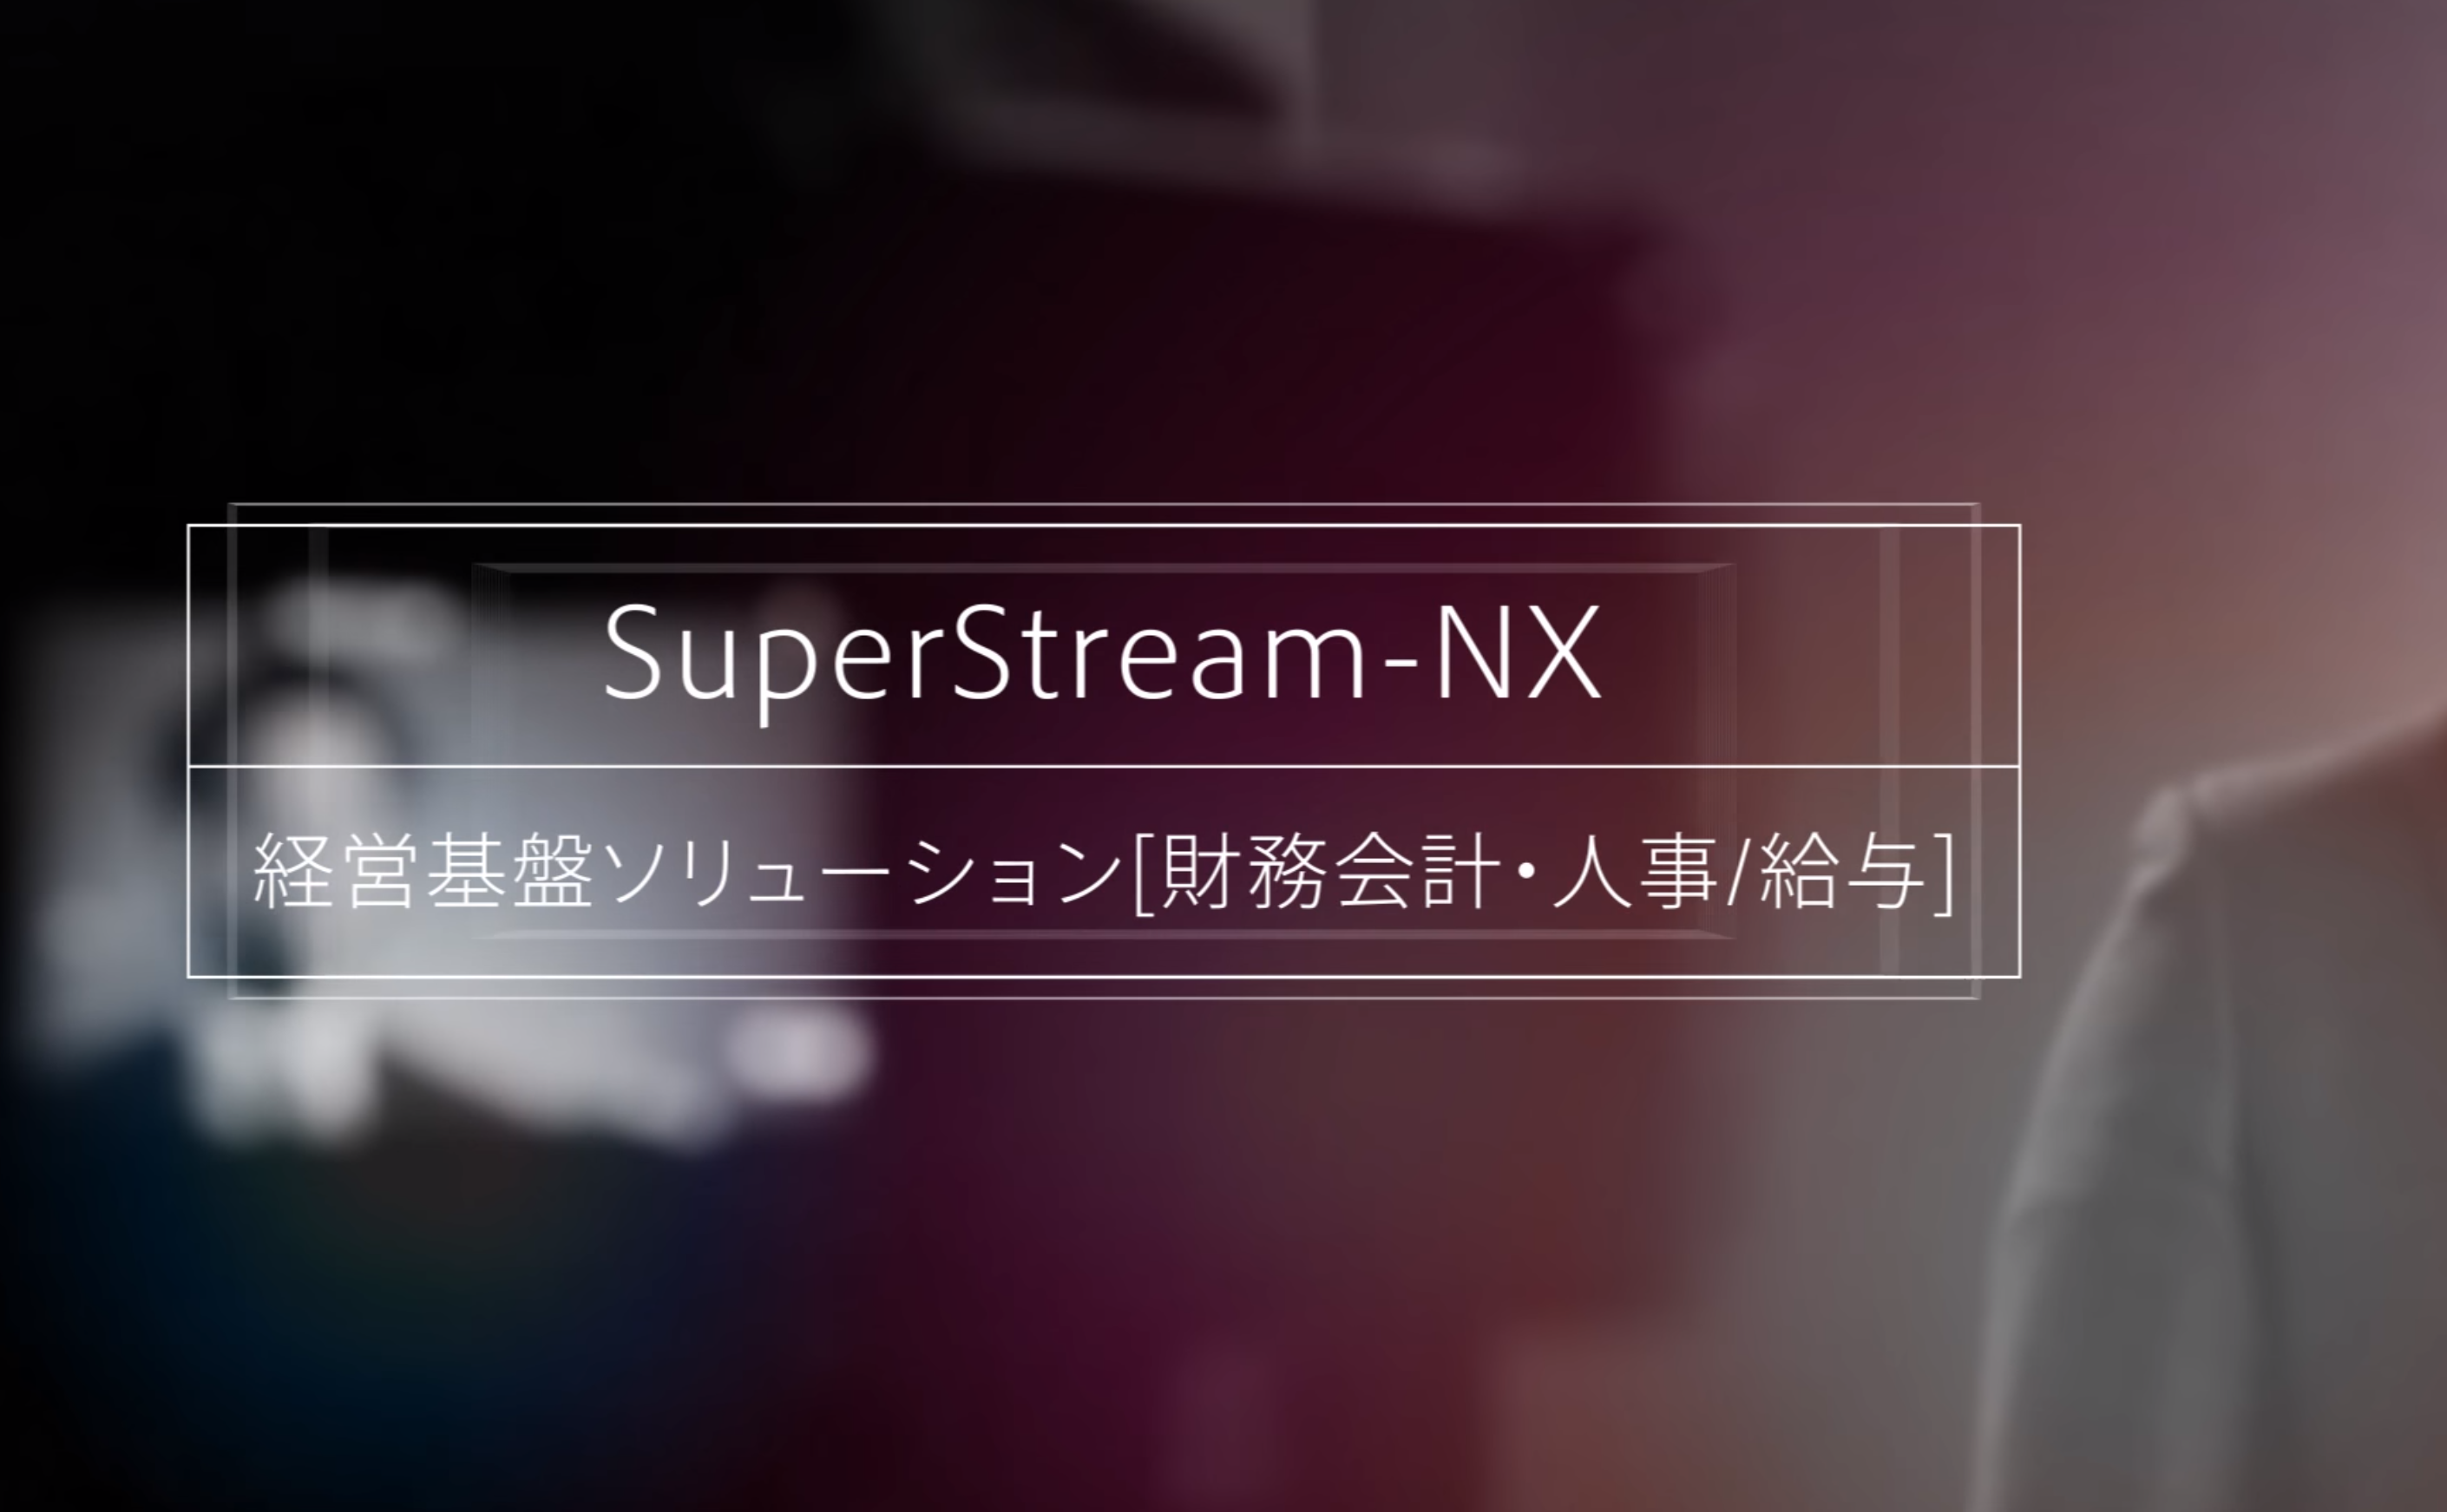 What's SuperStream？